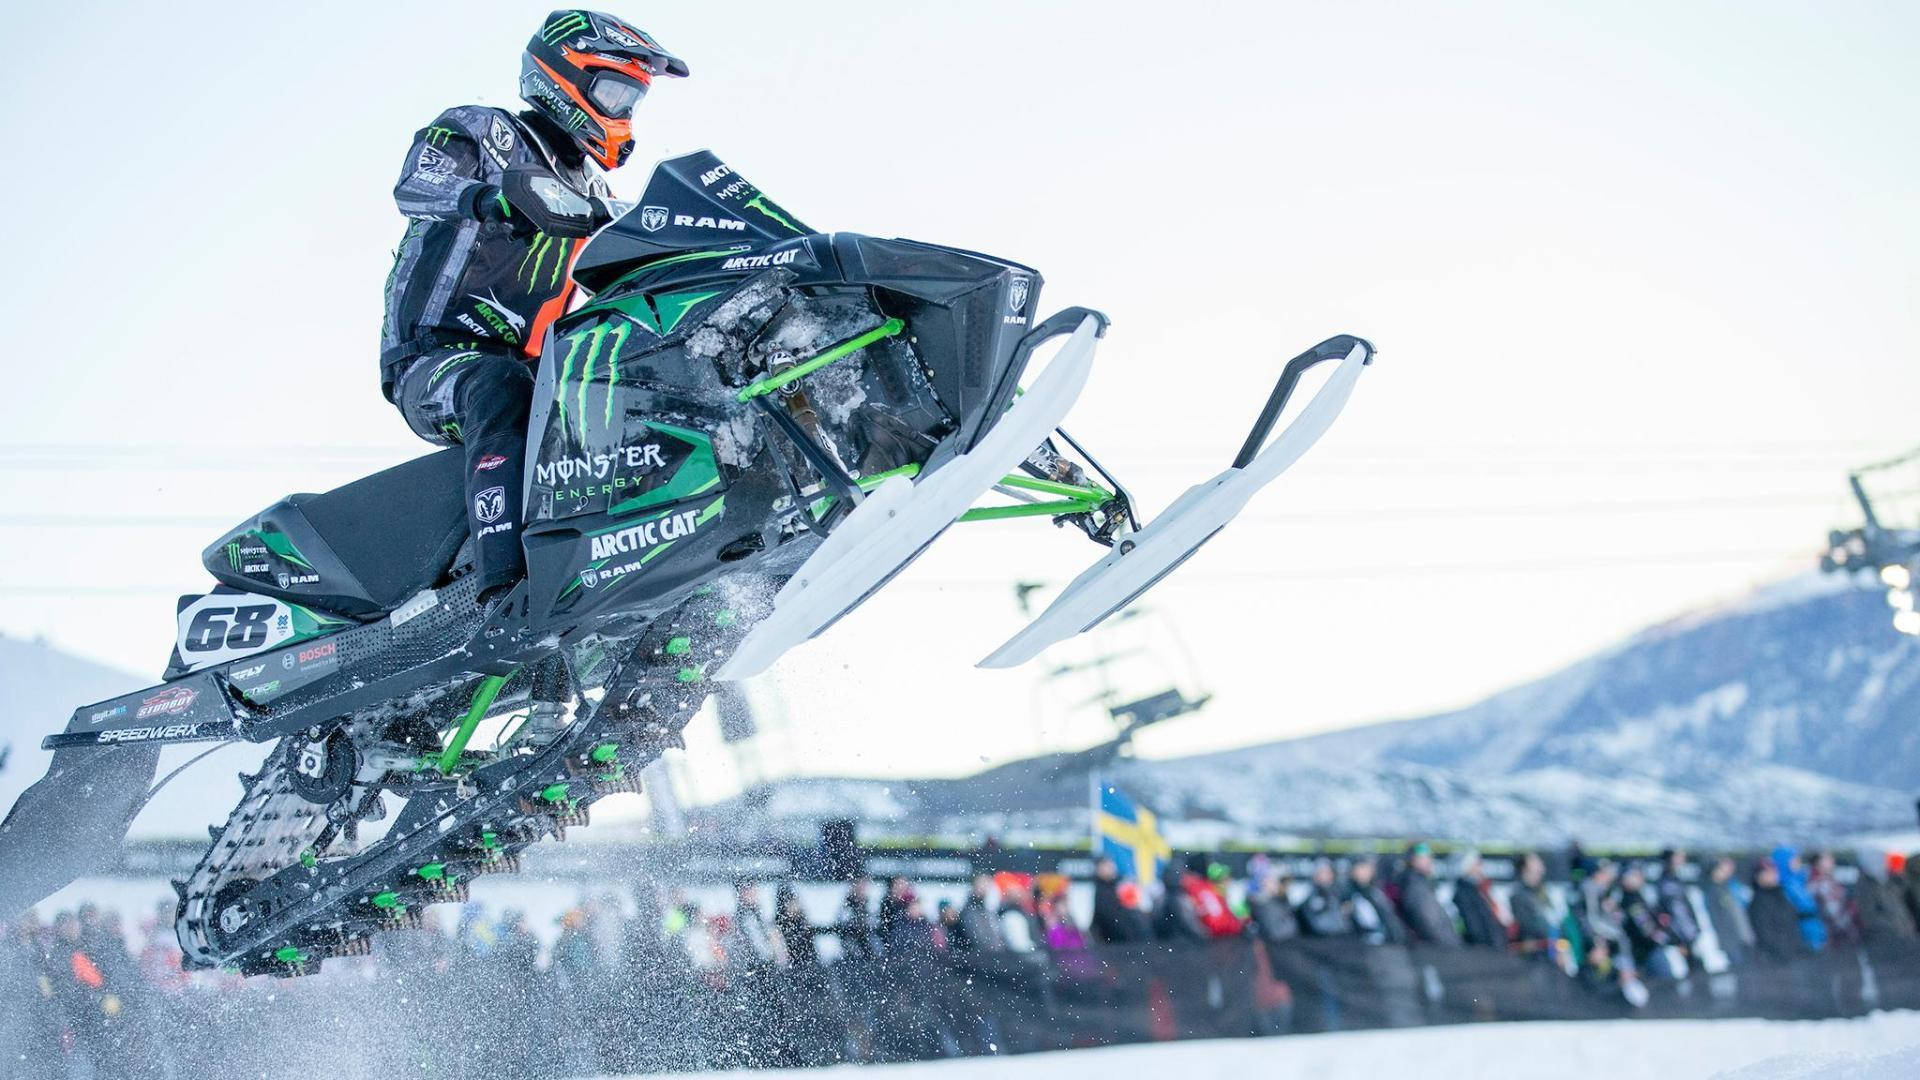 Daring Snowmobile Stunt At X Games Background